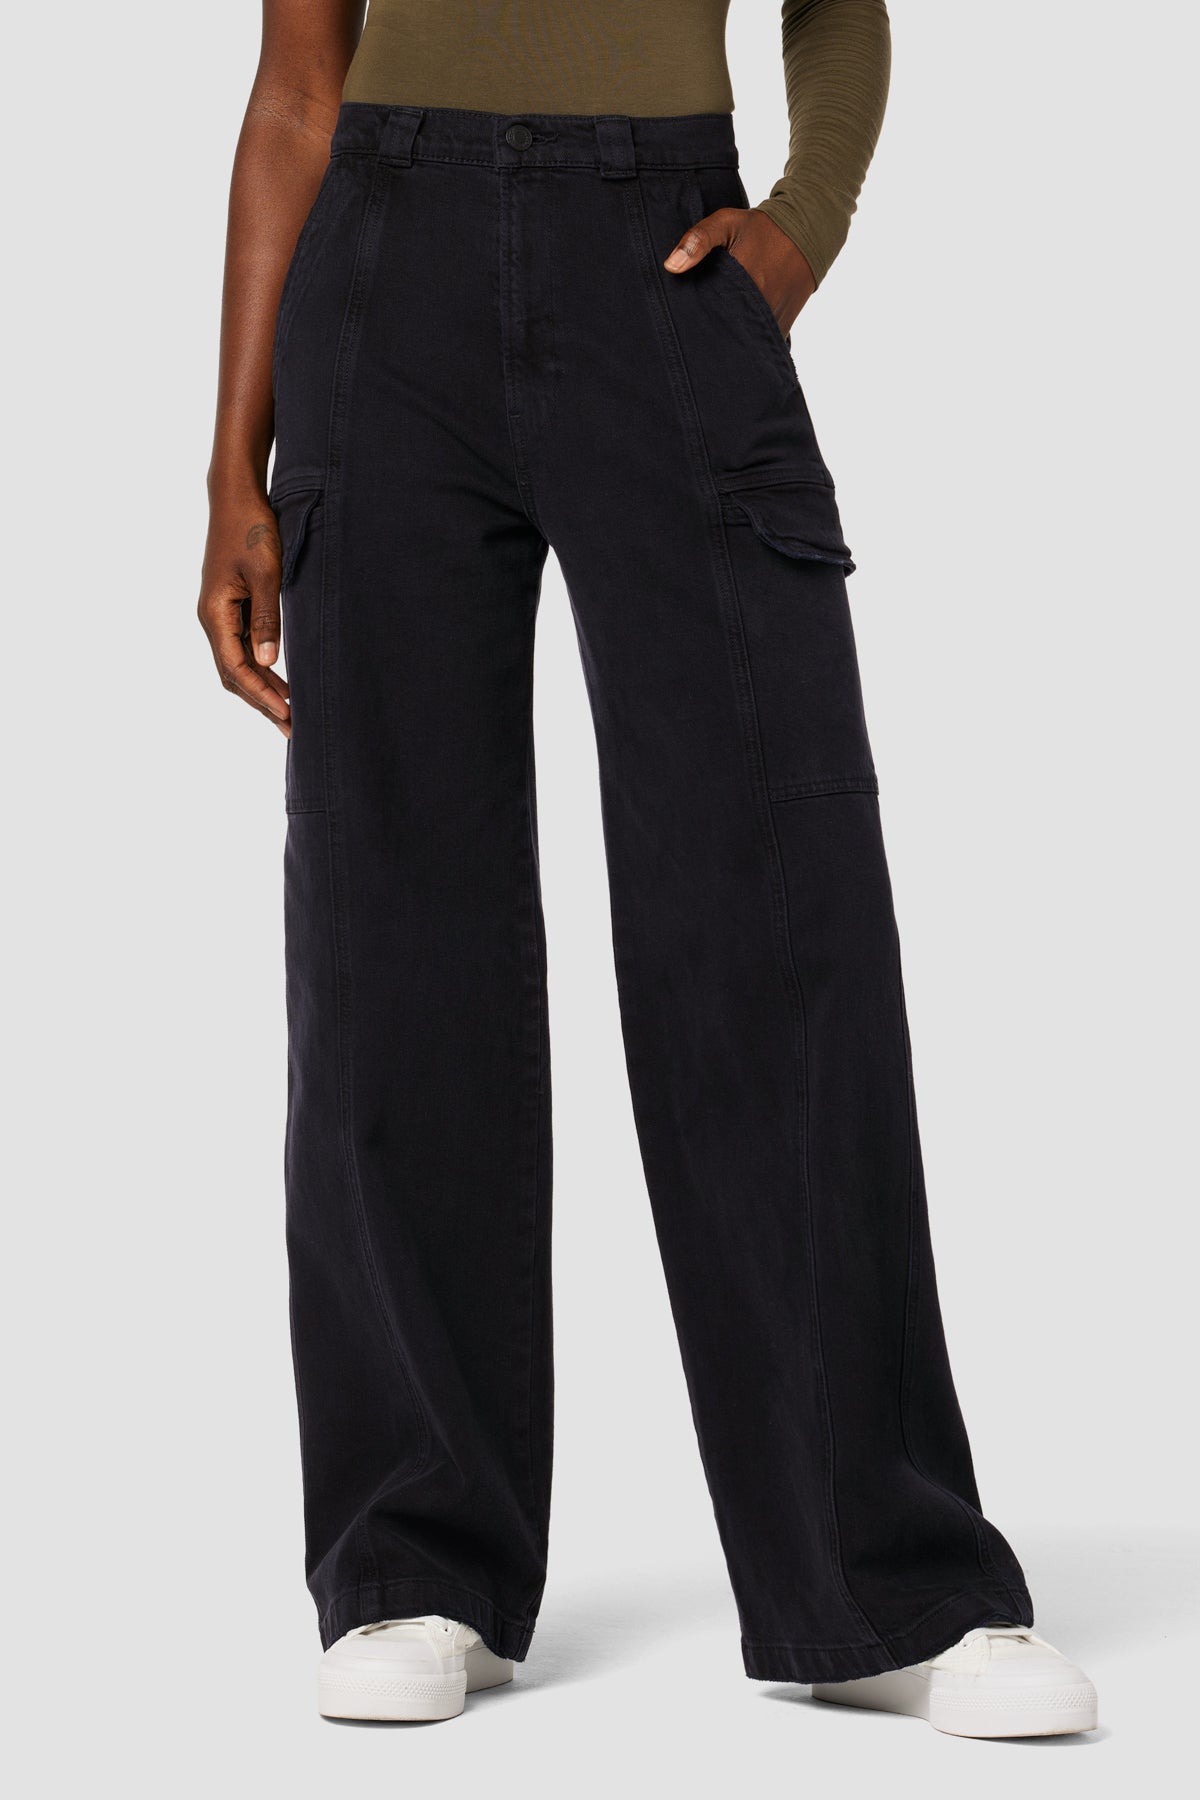 Plus Washed Black Faux Leather Wide Leg High Waisted Cargo Pants